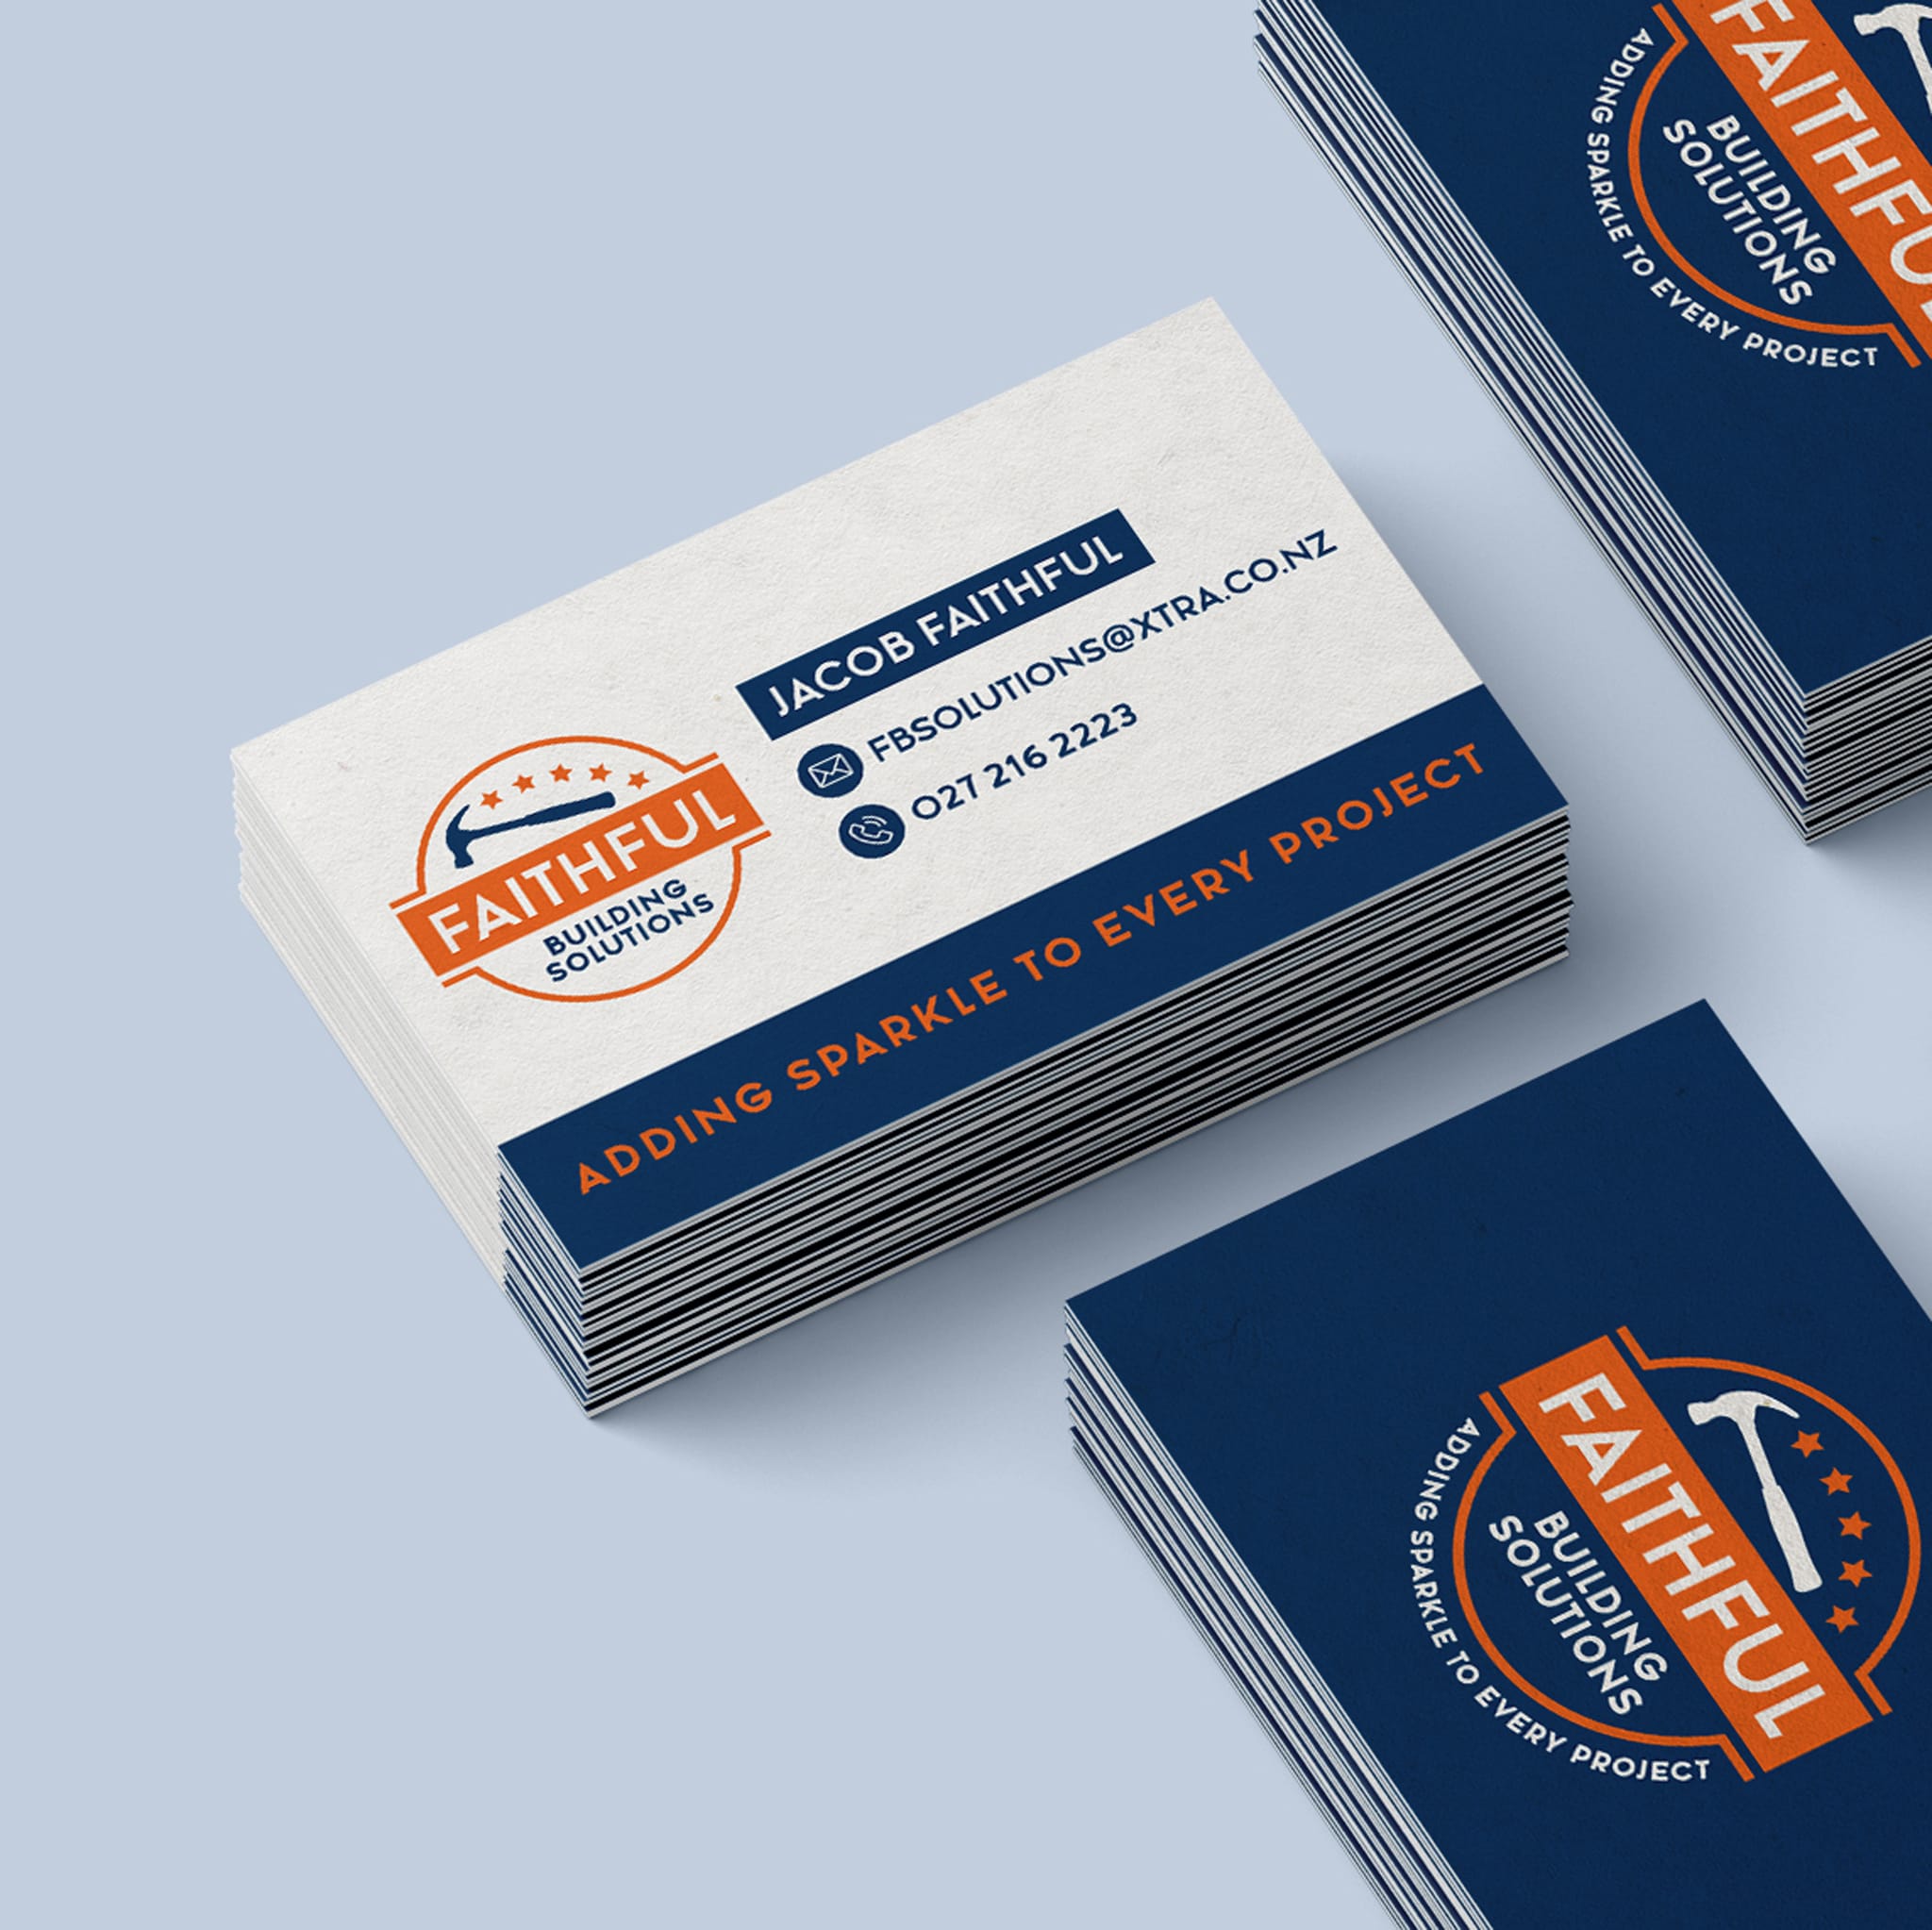 Business card design for Faithful Building Solutions by MoMac Graphic Designers in Christchurch